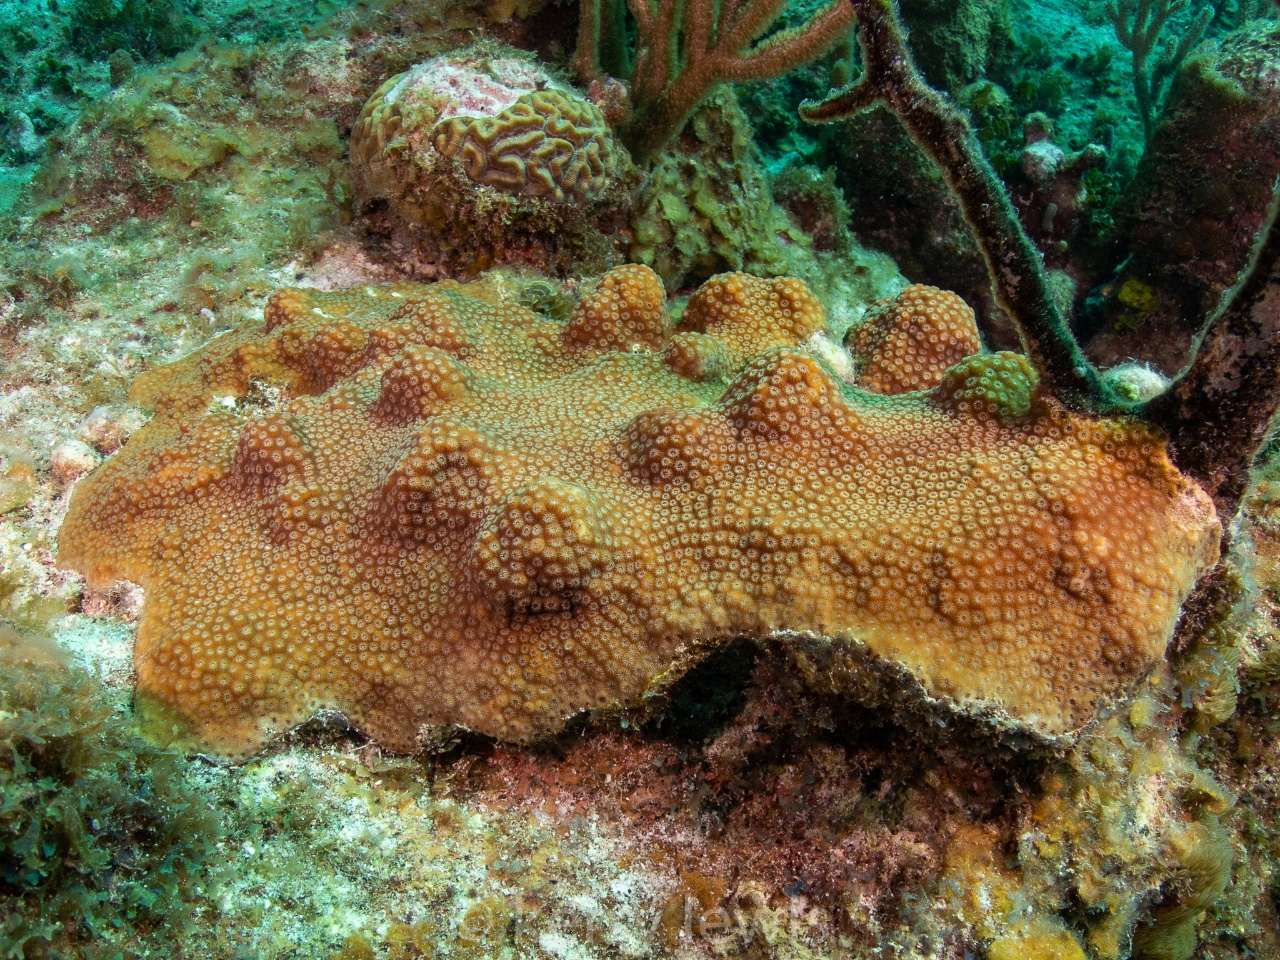 Corail étoile en bloc - Orbicella franksi - <a href=' https://www.inaturalist.org/photos/118977462 '>Kerry Lewis</a>, <a href=' https://creativecommons.org/licenses/by-nc/4.0/ '>CC BY-NC 4.0</a>, via iNaturalist - BioObs